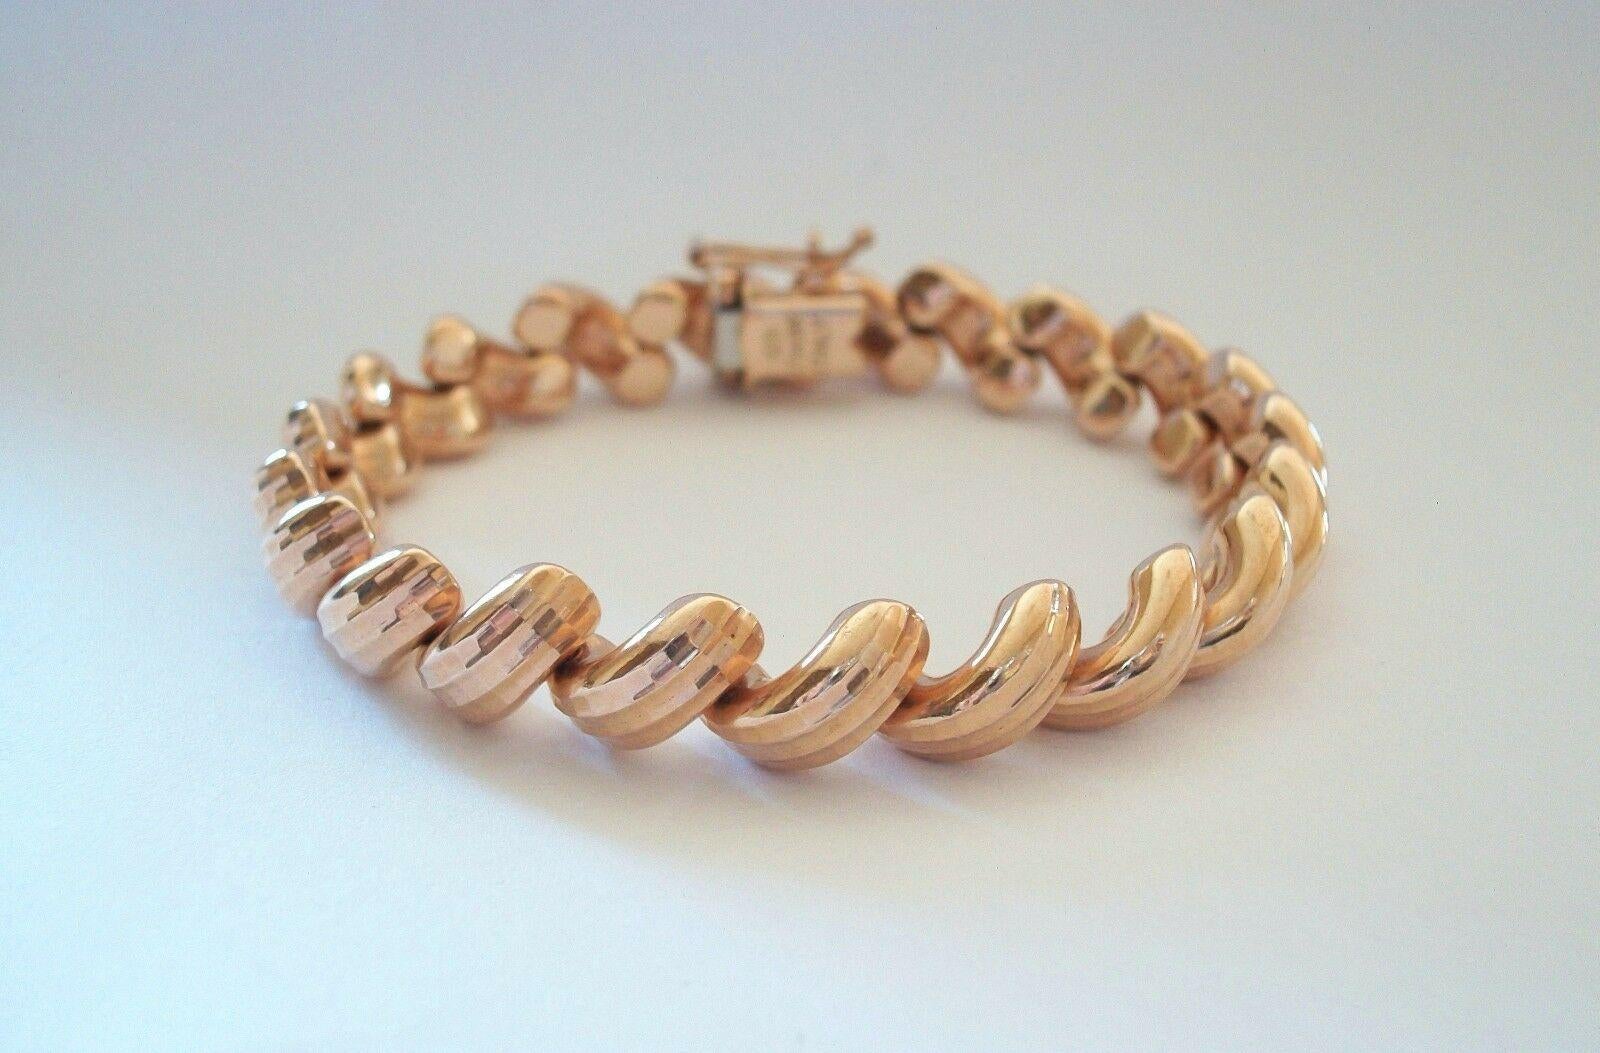 ITAOR - Vintage rose gold vermeil over sterling silver fancy link bracelet - fine details with faceted finish - box clasp with stainless steel closure and 'figure eight' safety clasp - signed on the clasp - Italy - late 20th century.

Excellent